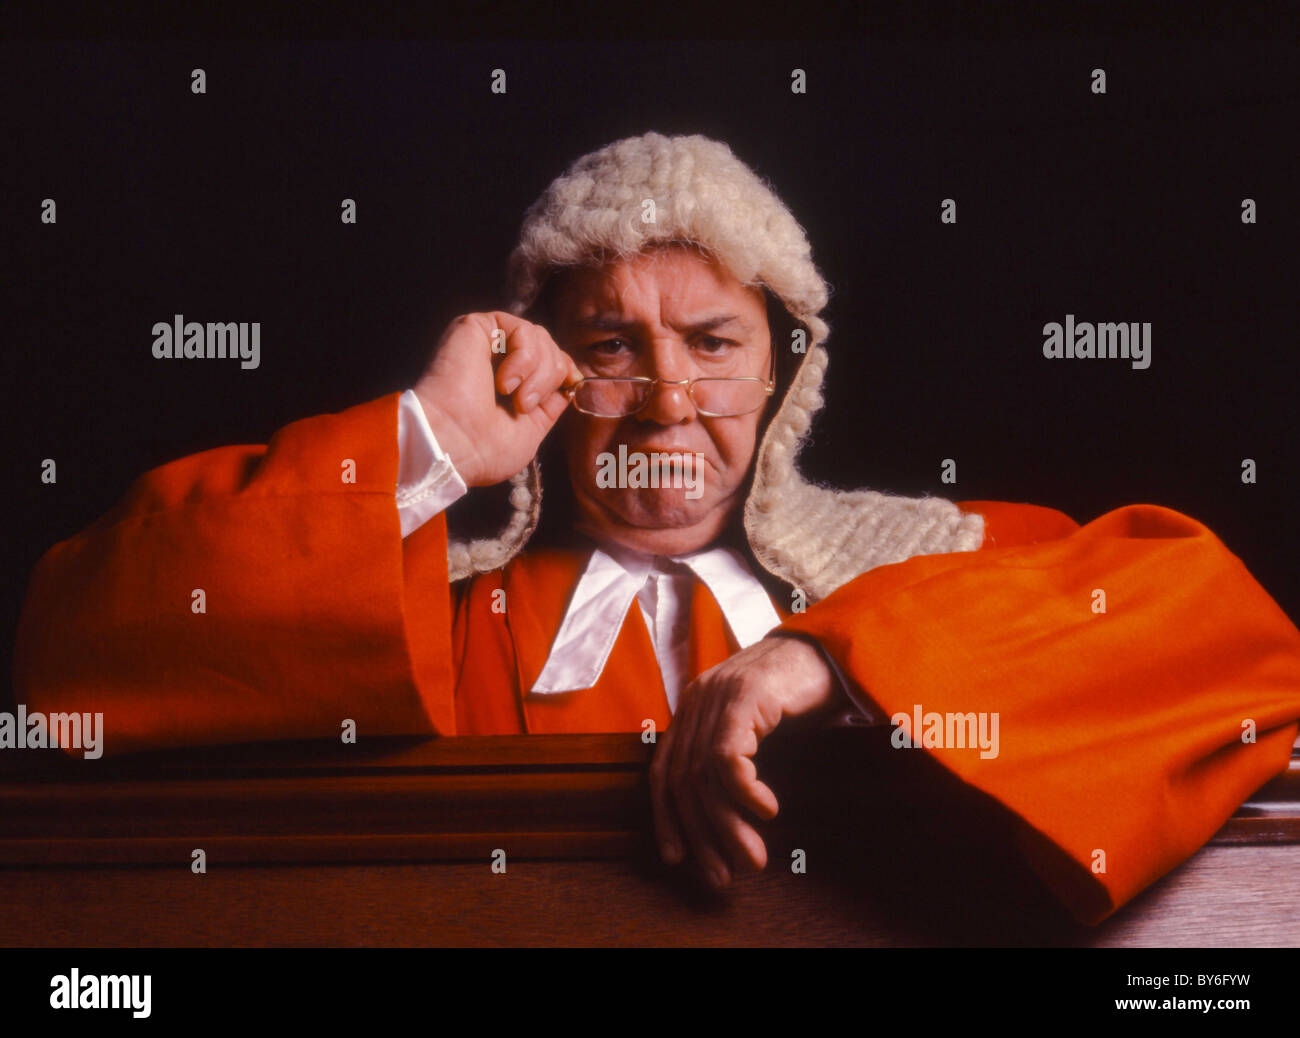 HIGH COURT JUDGE IN RED ROBE Stock Photo